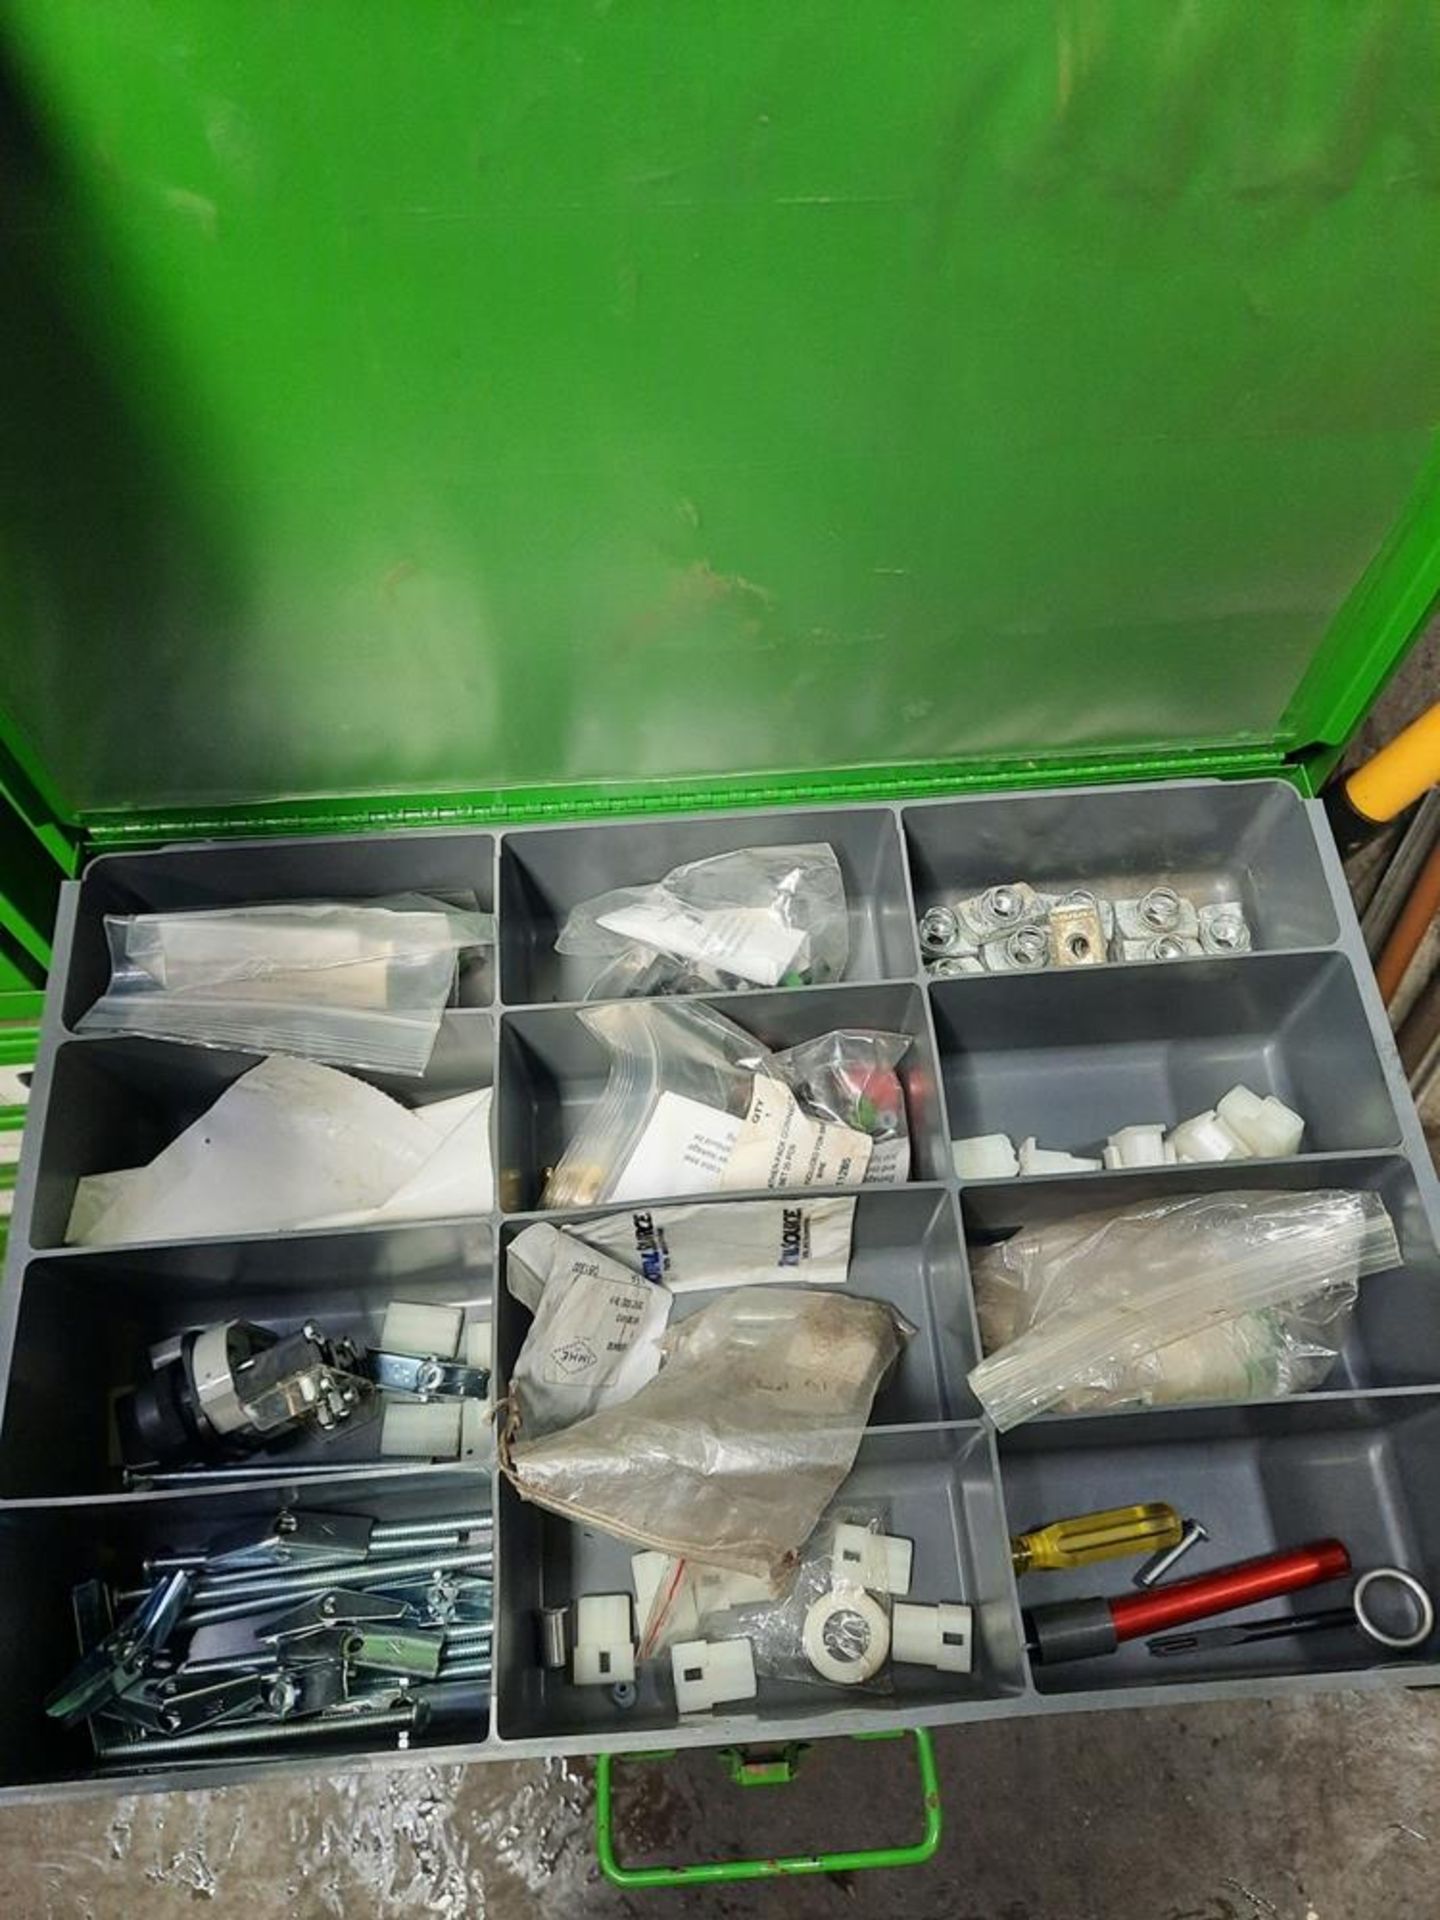 Lot Shamrock Co. Storage Box with (12) drawers with contents, paints, cable ties, cotter pins, - Image 9 of 14